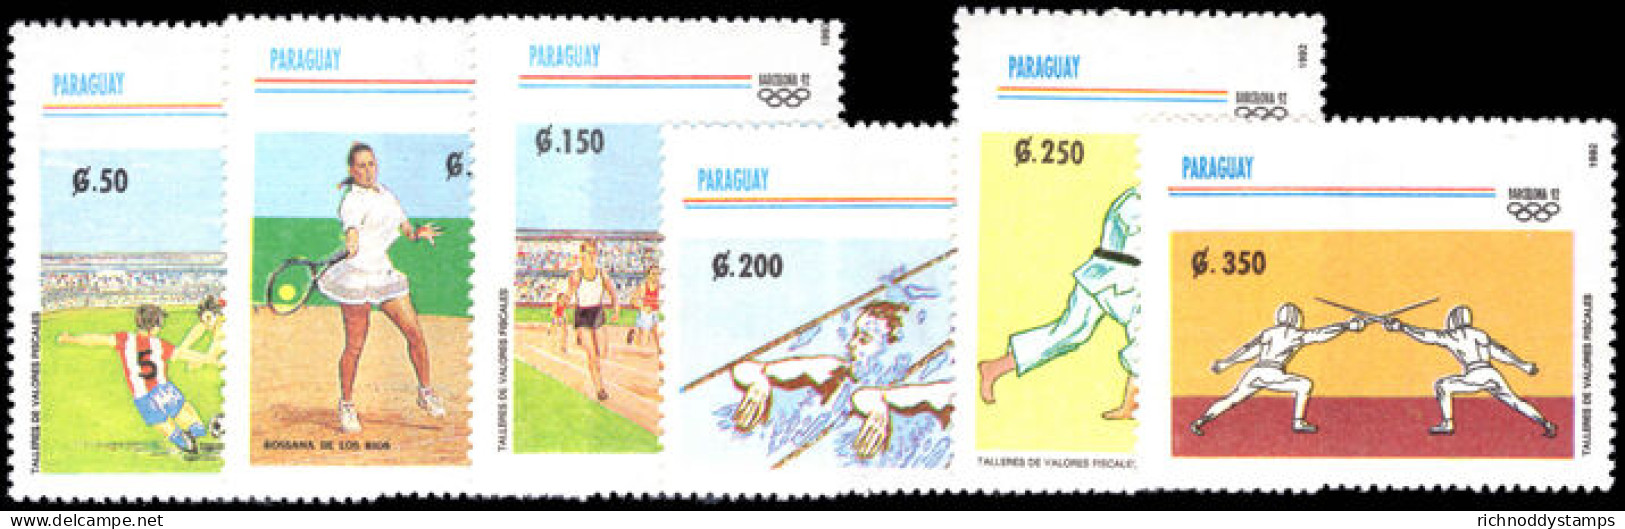 Paraguay 1992 Olympic Games Unmounted Mint. - Paraguay